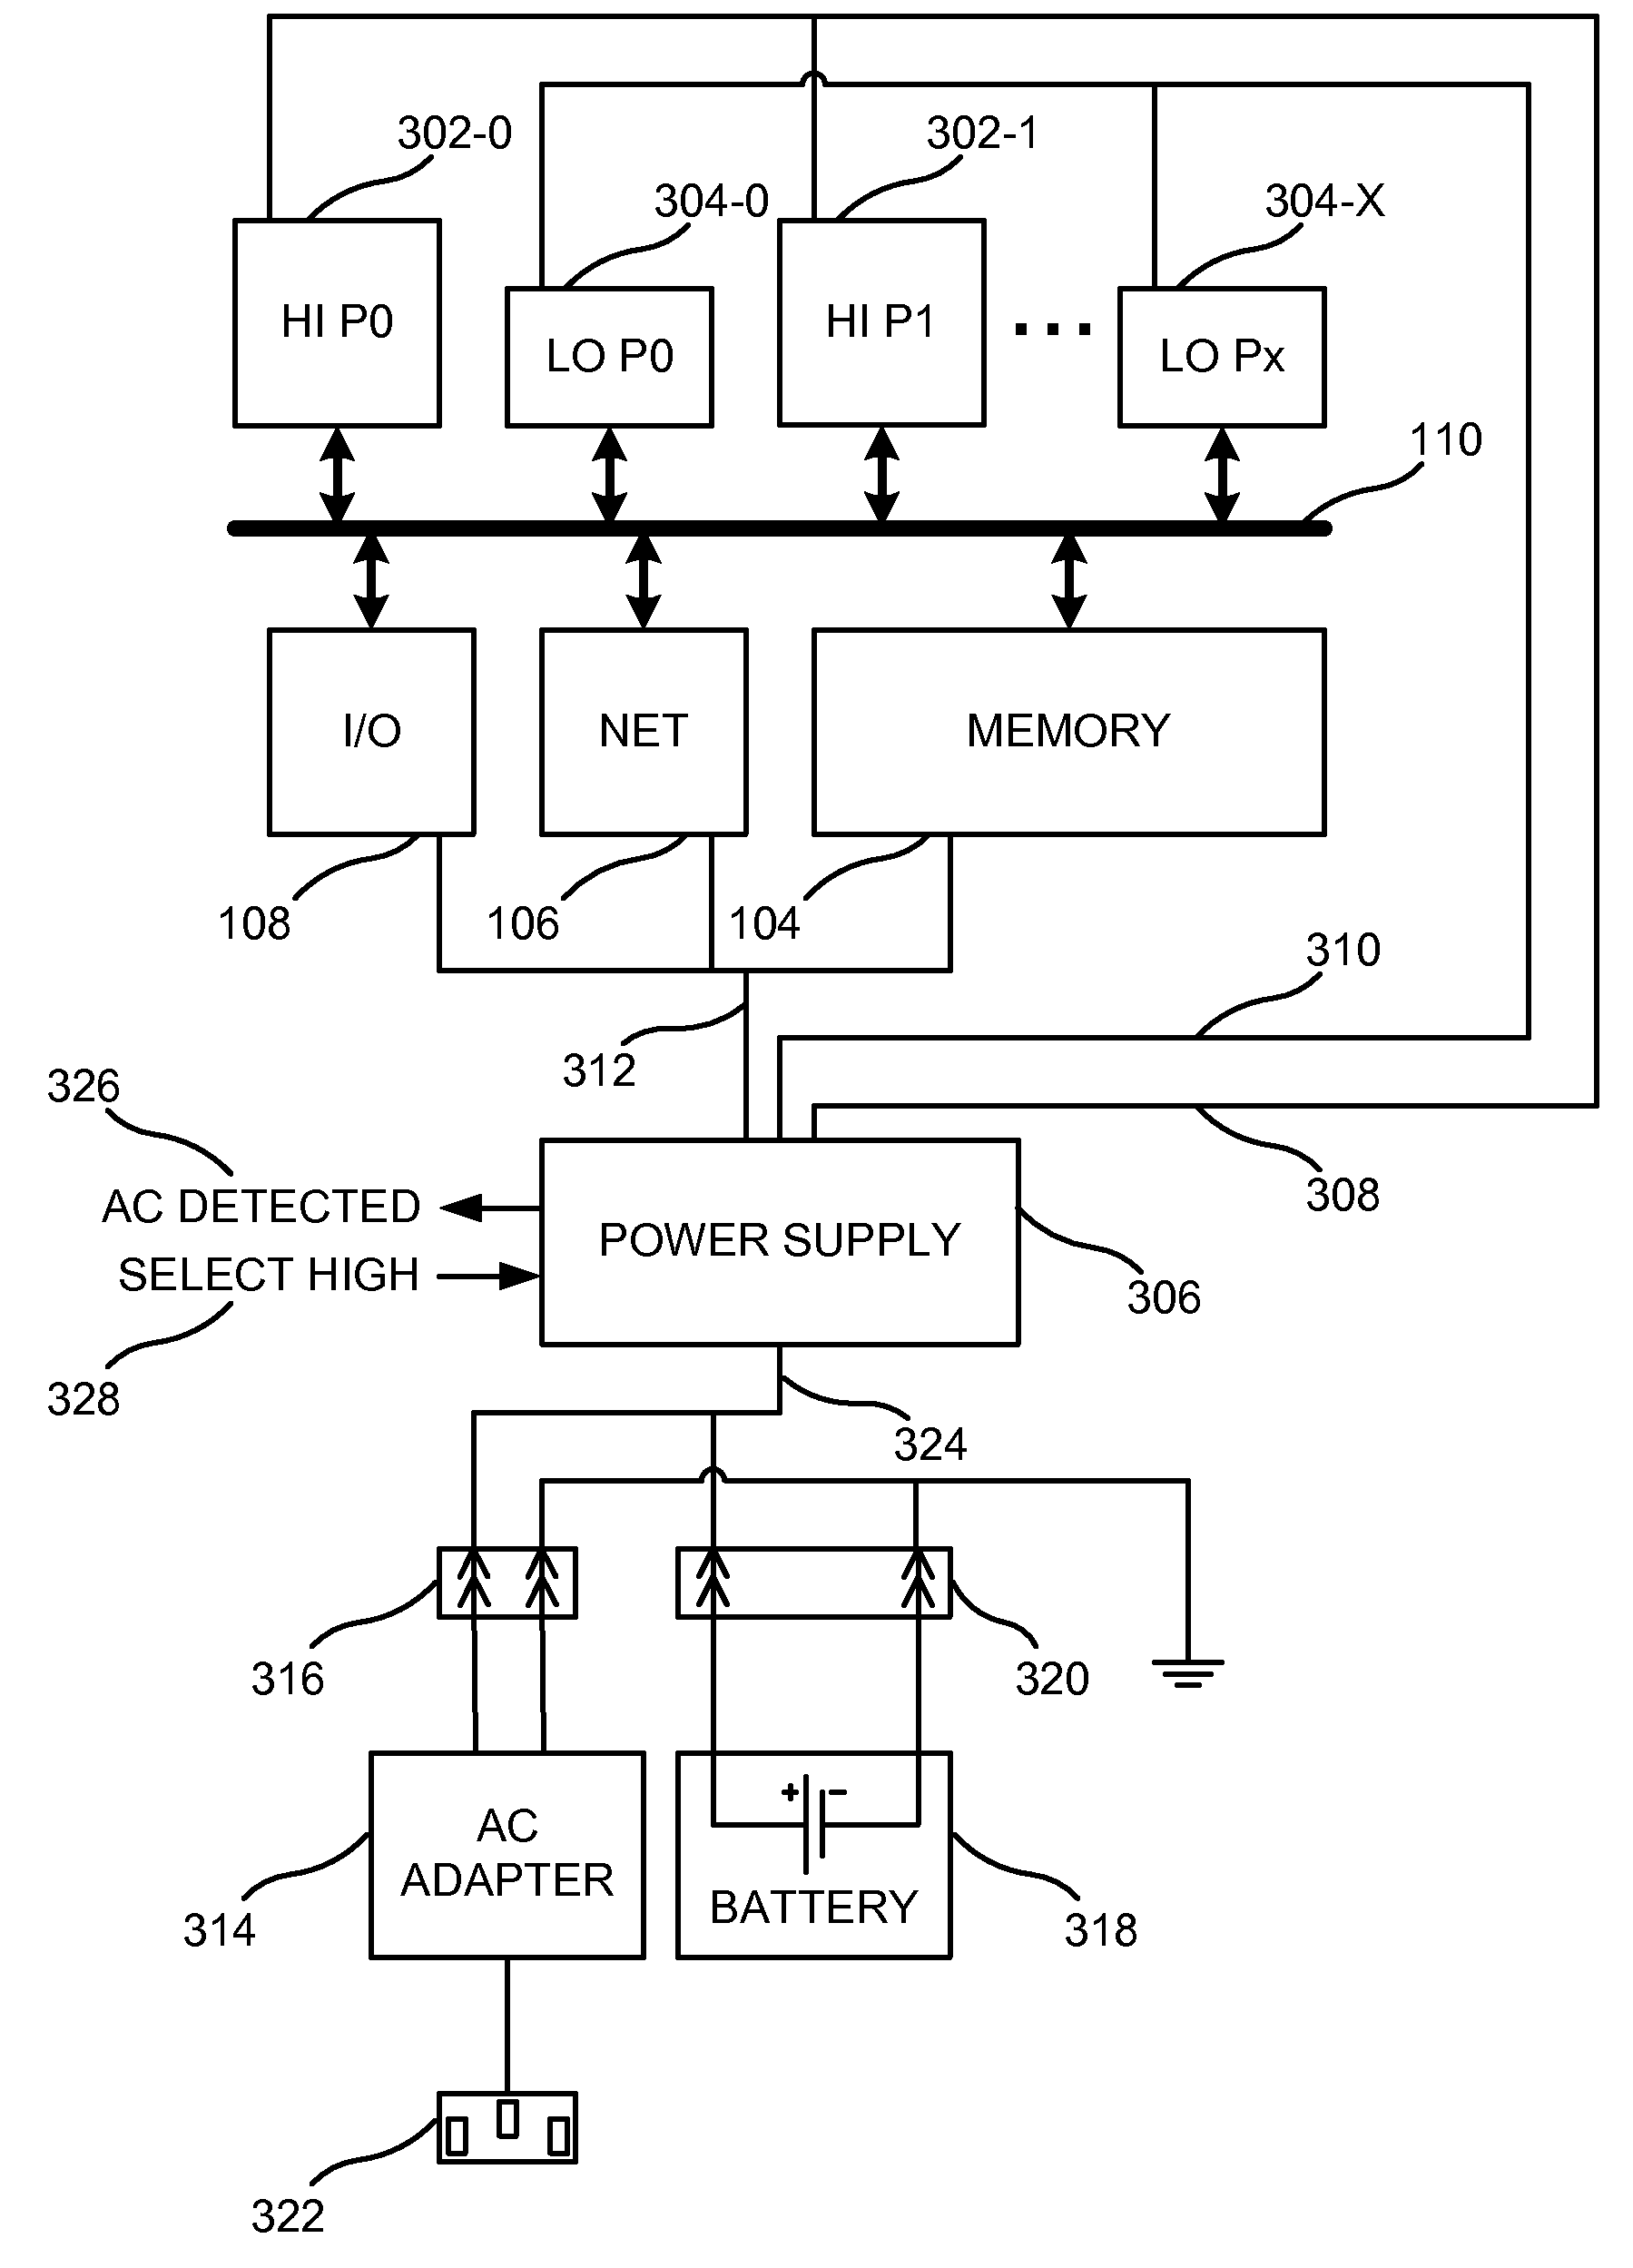 Apparatus, System, and Method for Power Management Utilizing Multiple Processor Types